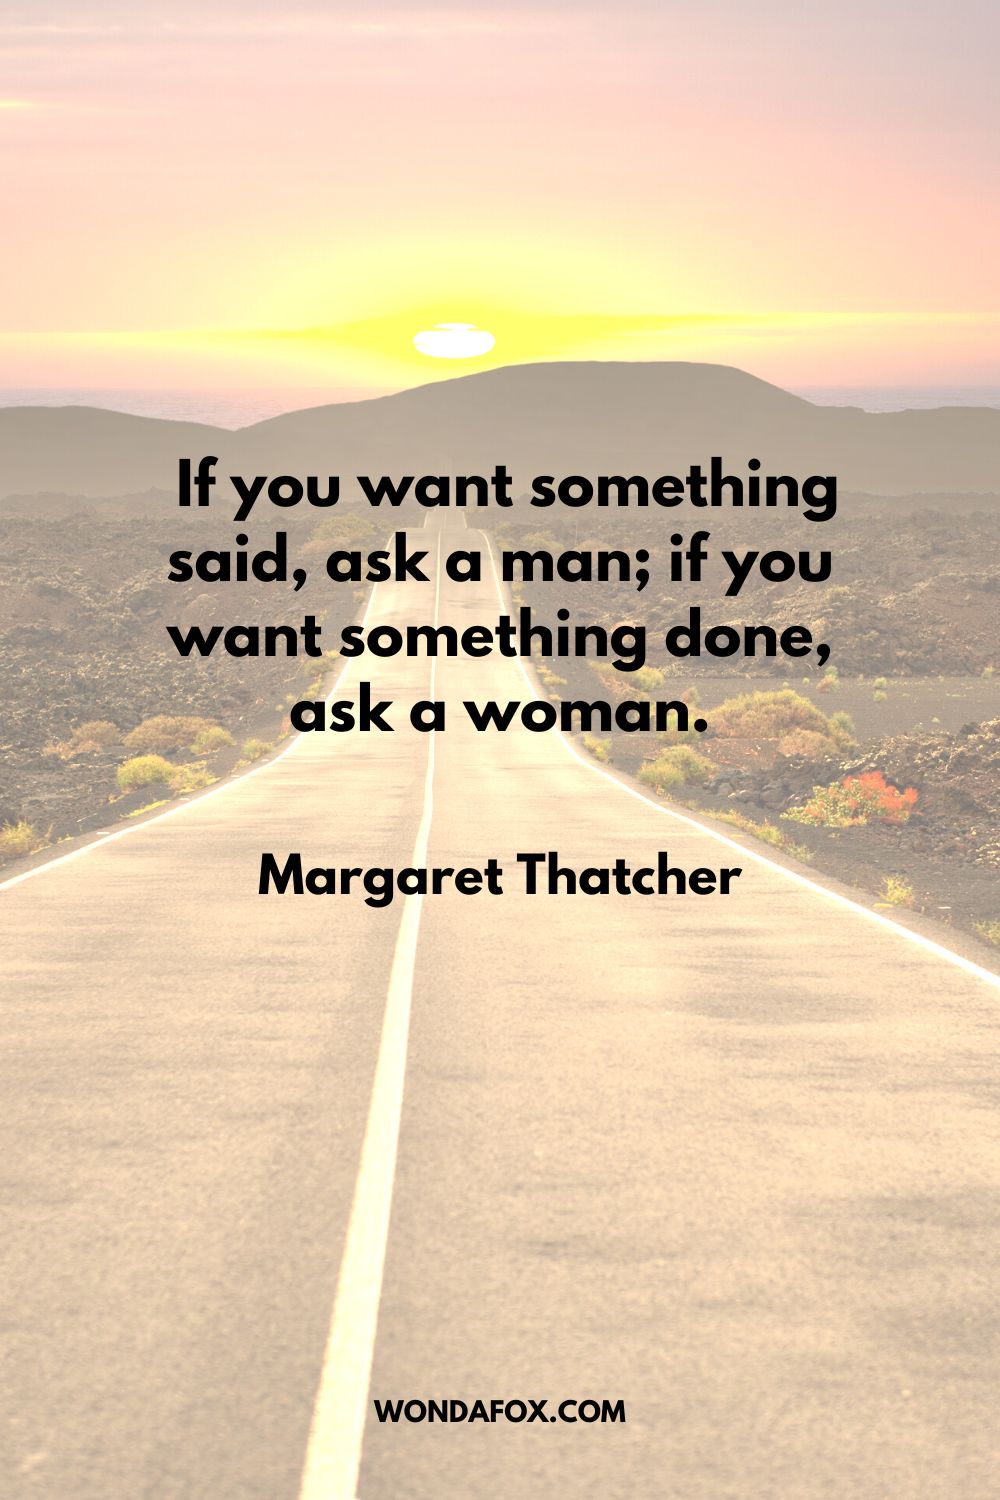  If you want something said, ask a man; if you want something done, ask a woman. Margaret Thatcher